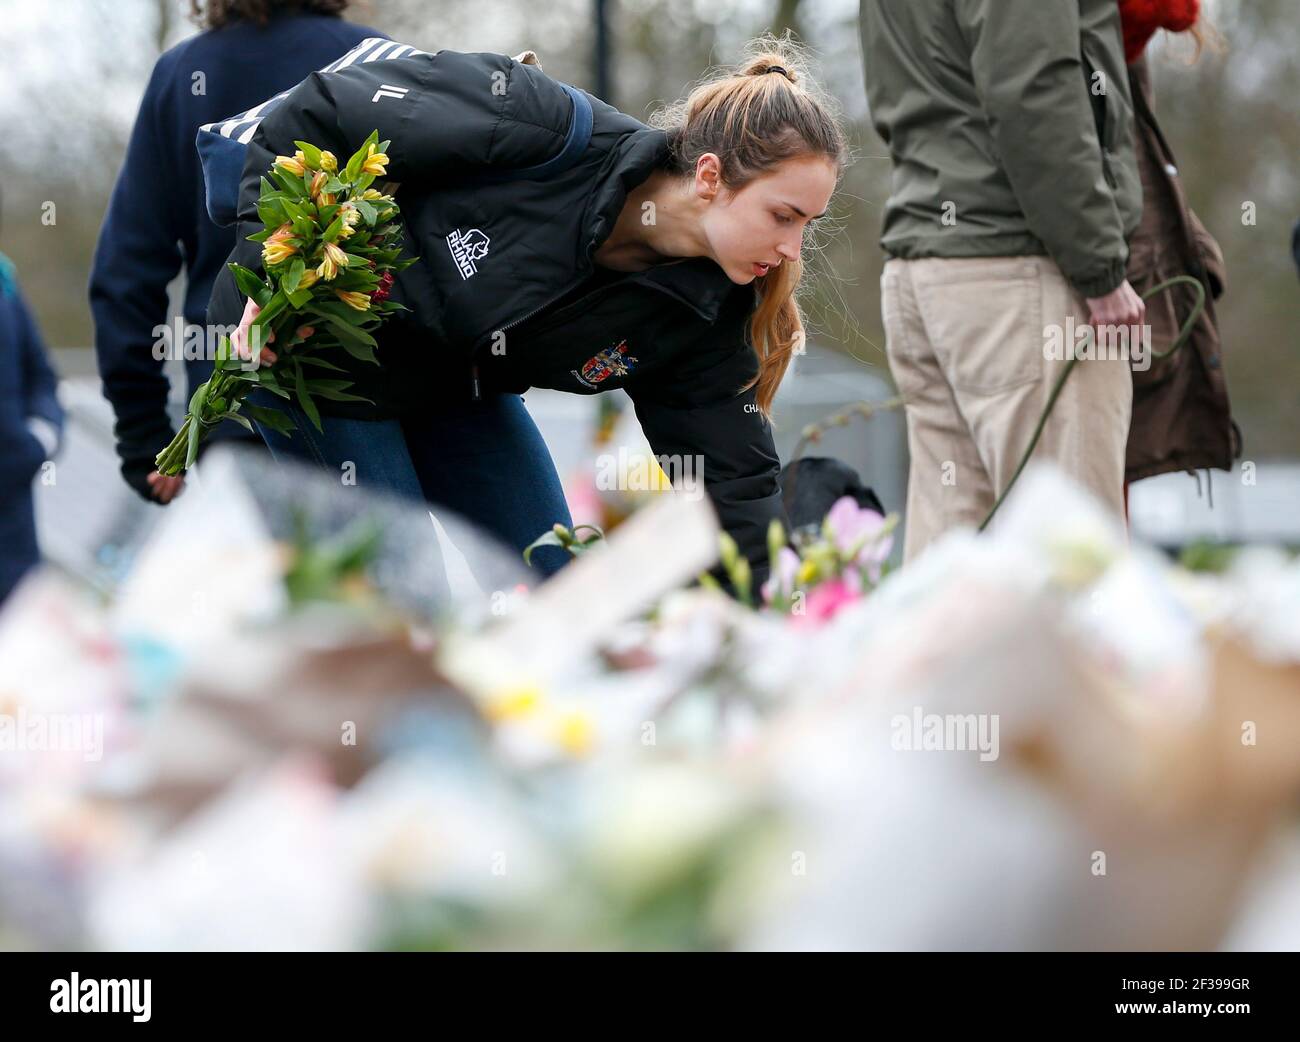 London, UK. 15th Mar, 2021. A woman lays floral tributes at the bandstand on Clapham Common to mourn for Sarah Everard in London, Britain, on March 15, 2021. A serving Metropolitan police officer on March 13 appeared in court in London after being charged with the kidnap and murder of a 33-year-old woman. Wayne Couzens, 48, was arrested after Sarah Everard, a marketing executive, went missing while walking home from a friend's apartment in south London on March 3. Credit: Xinhua/Alamy Live News Stock Photo